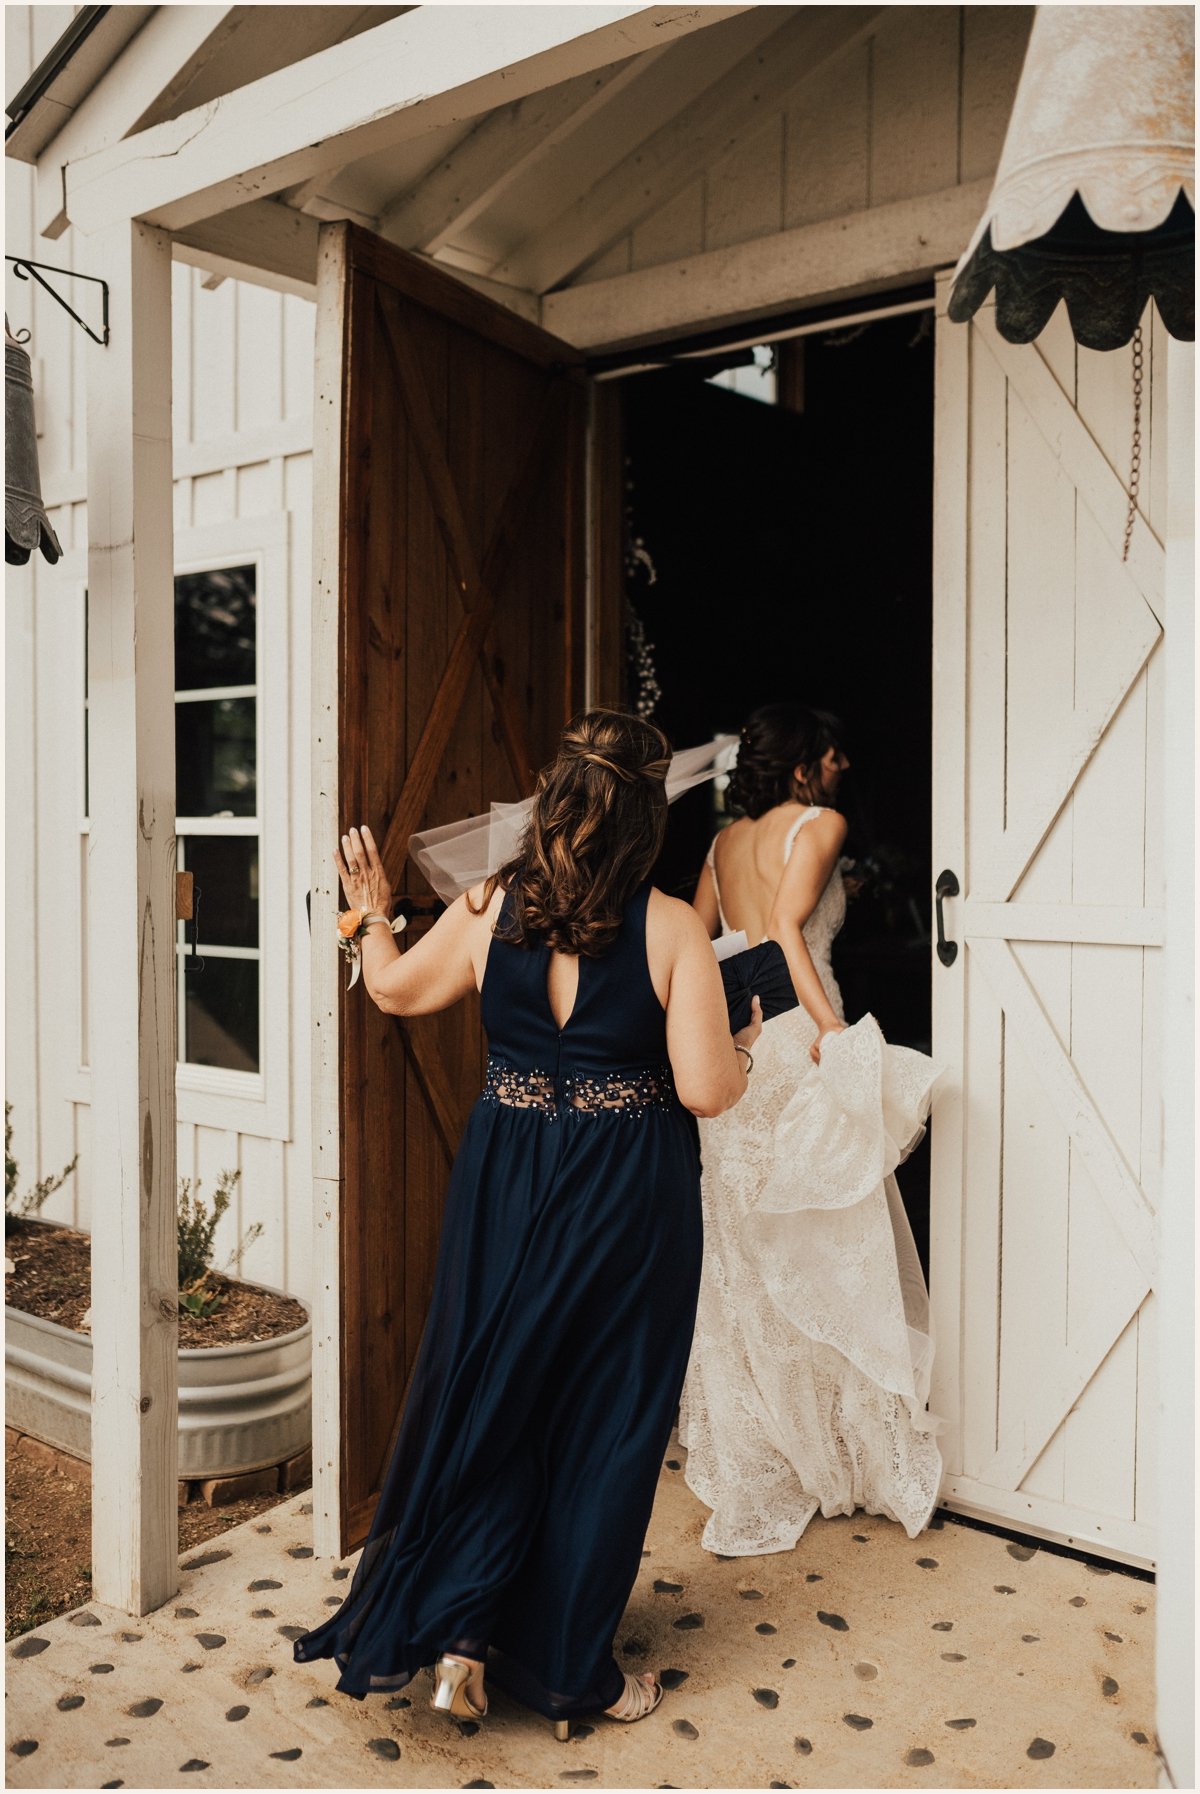 Wildflower Wedding in the Texas Hill Country | Austin Wedding Photographer | Lauren Parr Photography